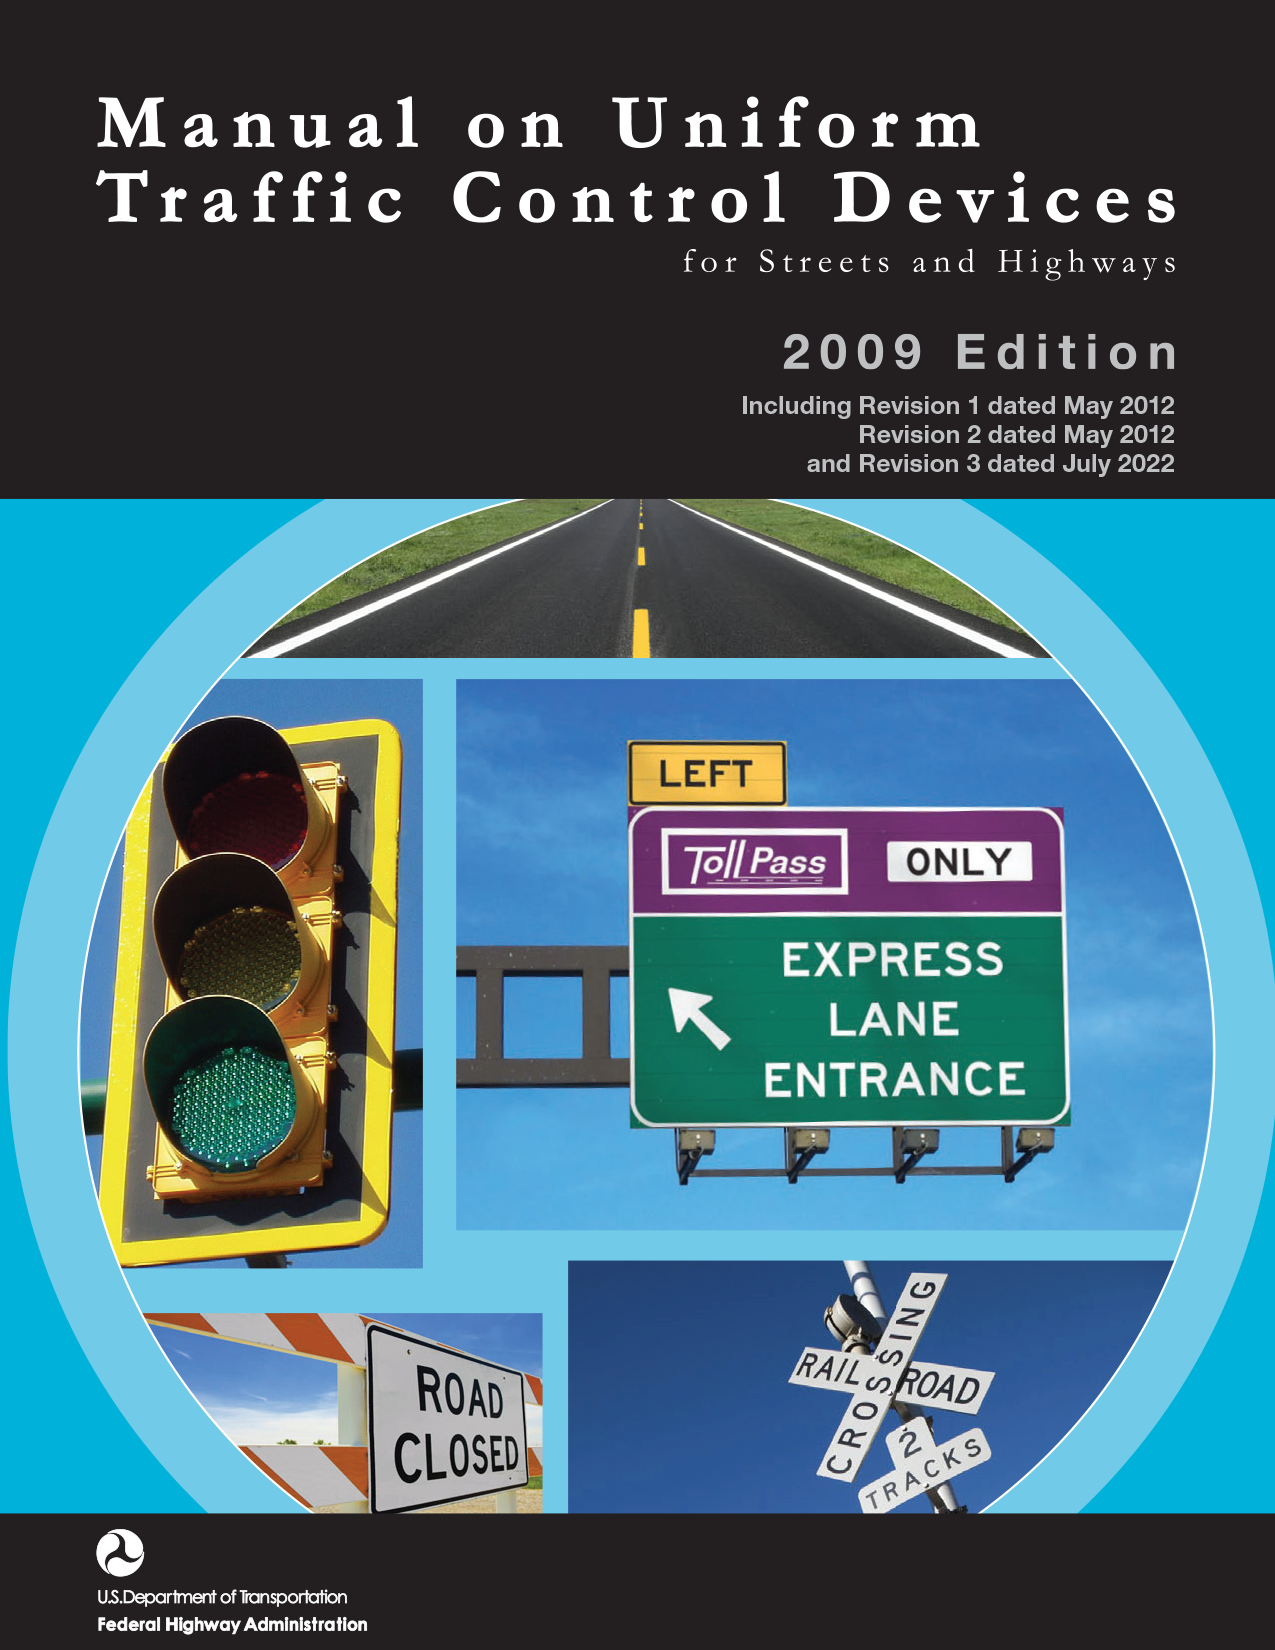 PDF version of the 2009 MUTCD with Revision Numbers 1, 2, and 3 incorporated, dated July 2022